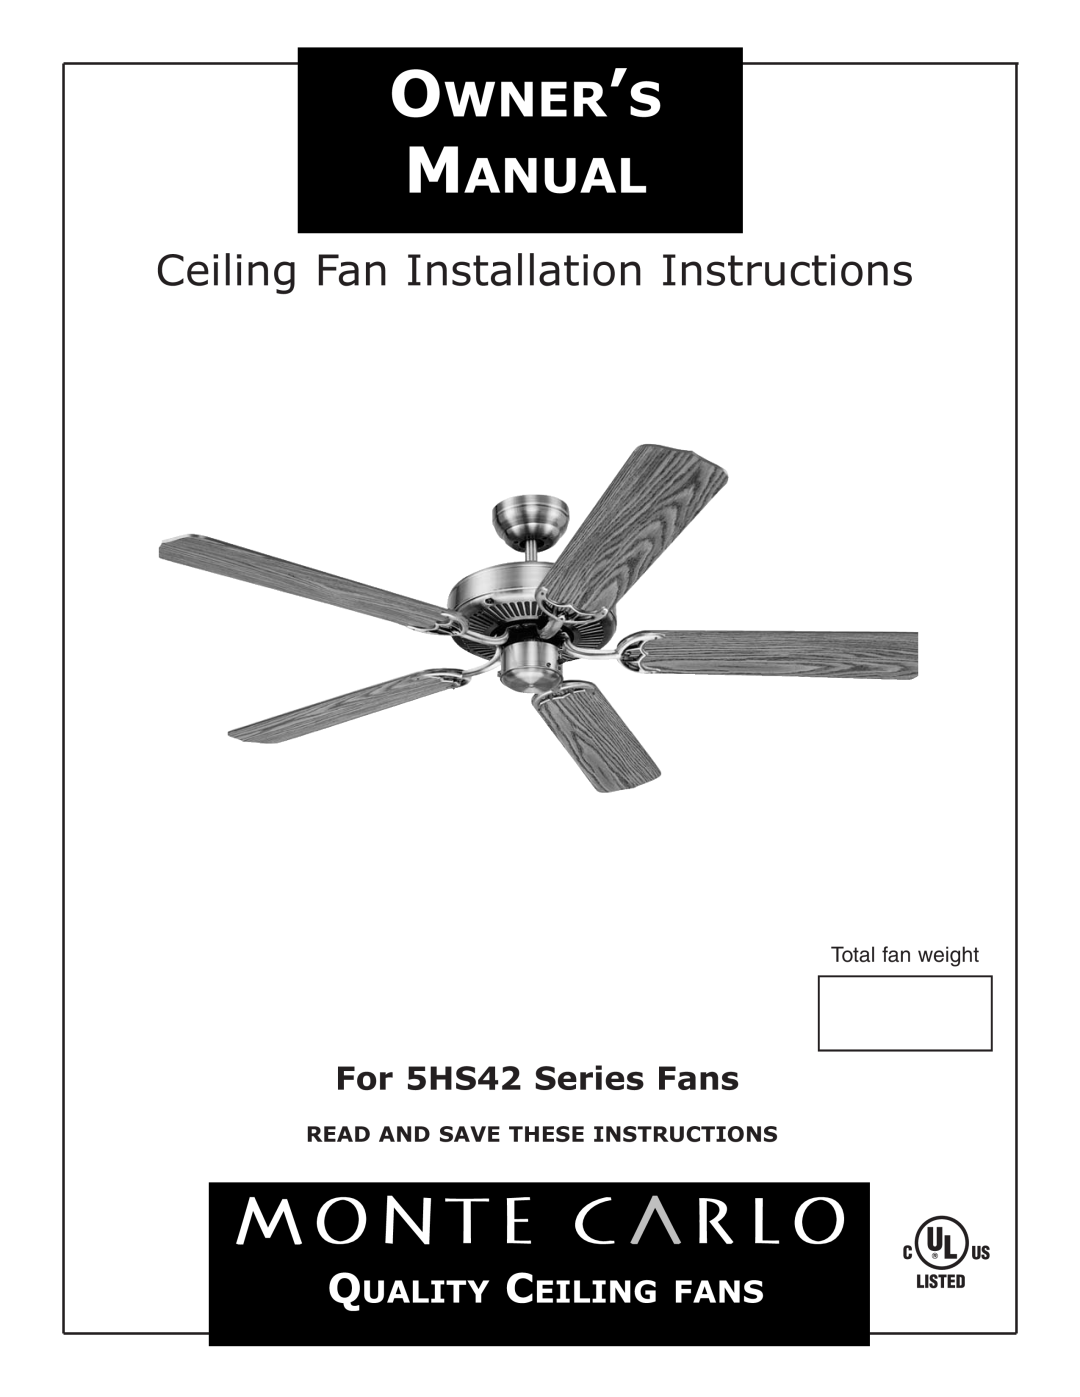 Monte Carlo Fan Company installation instructions Read And Save These Instructions, For 5HS42 Series Fans 